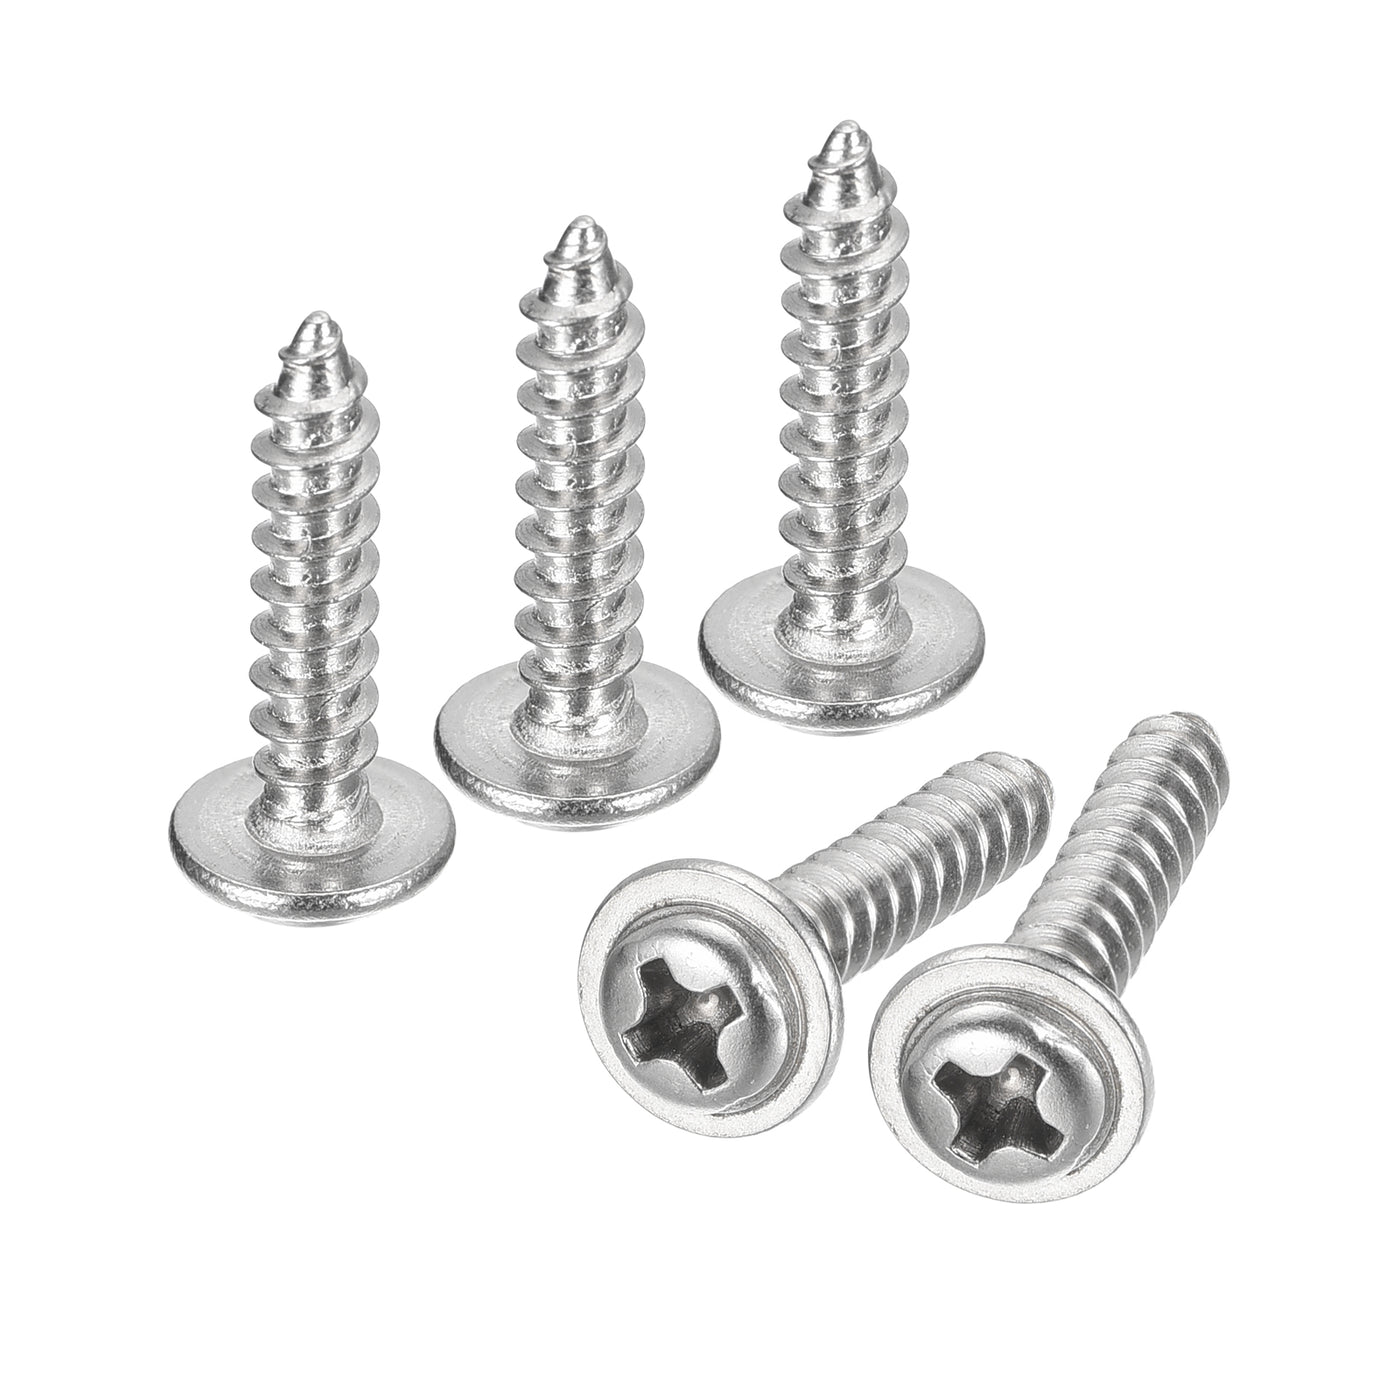 uxcell Uxcell ST3.5x20mm Phillips Pan Head Self-tapping Screw with Washer, 100pcs - 304 Stainless Steel Wood Screw Full Thread (Silver)